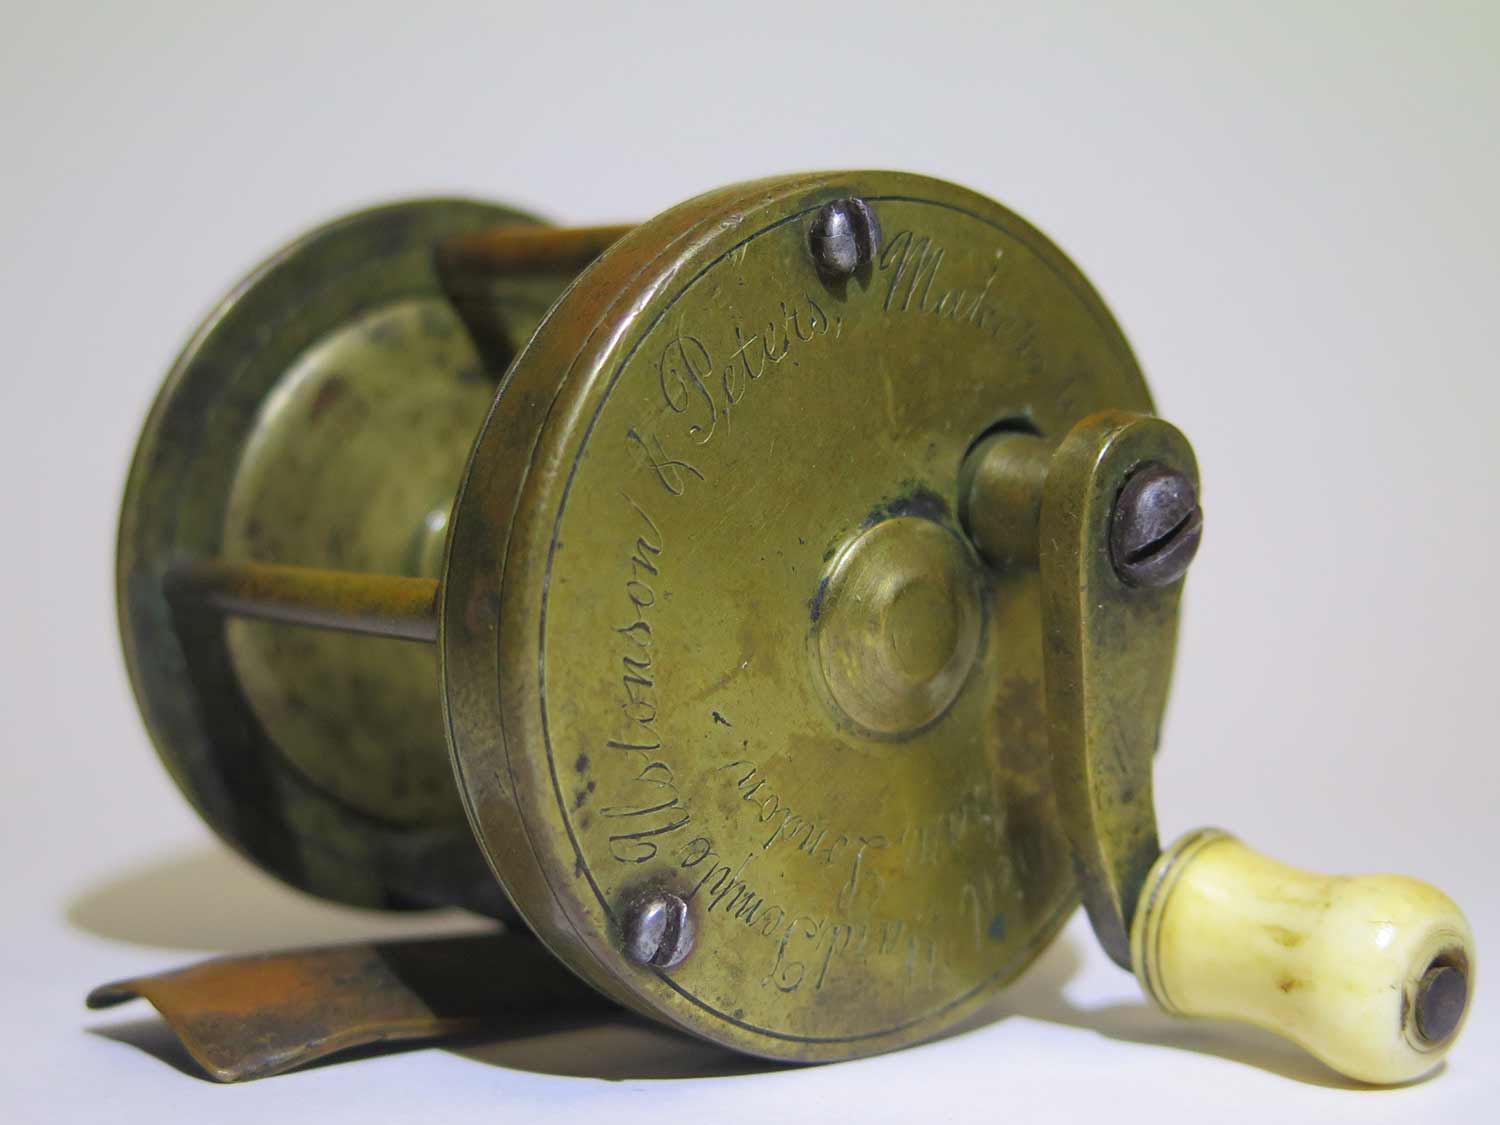 All Freshwater Vintage Casting Fishing Reels for sale